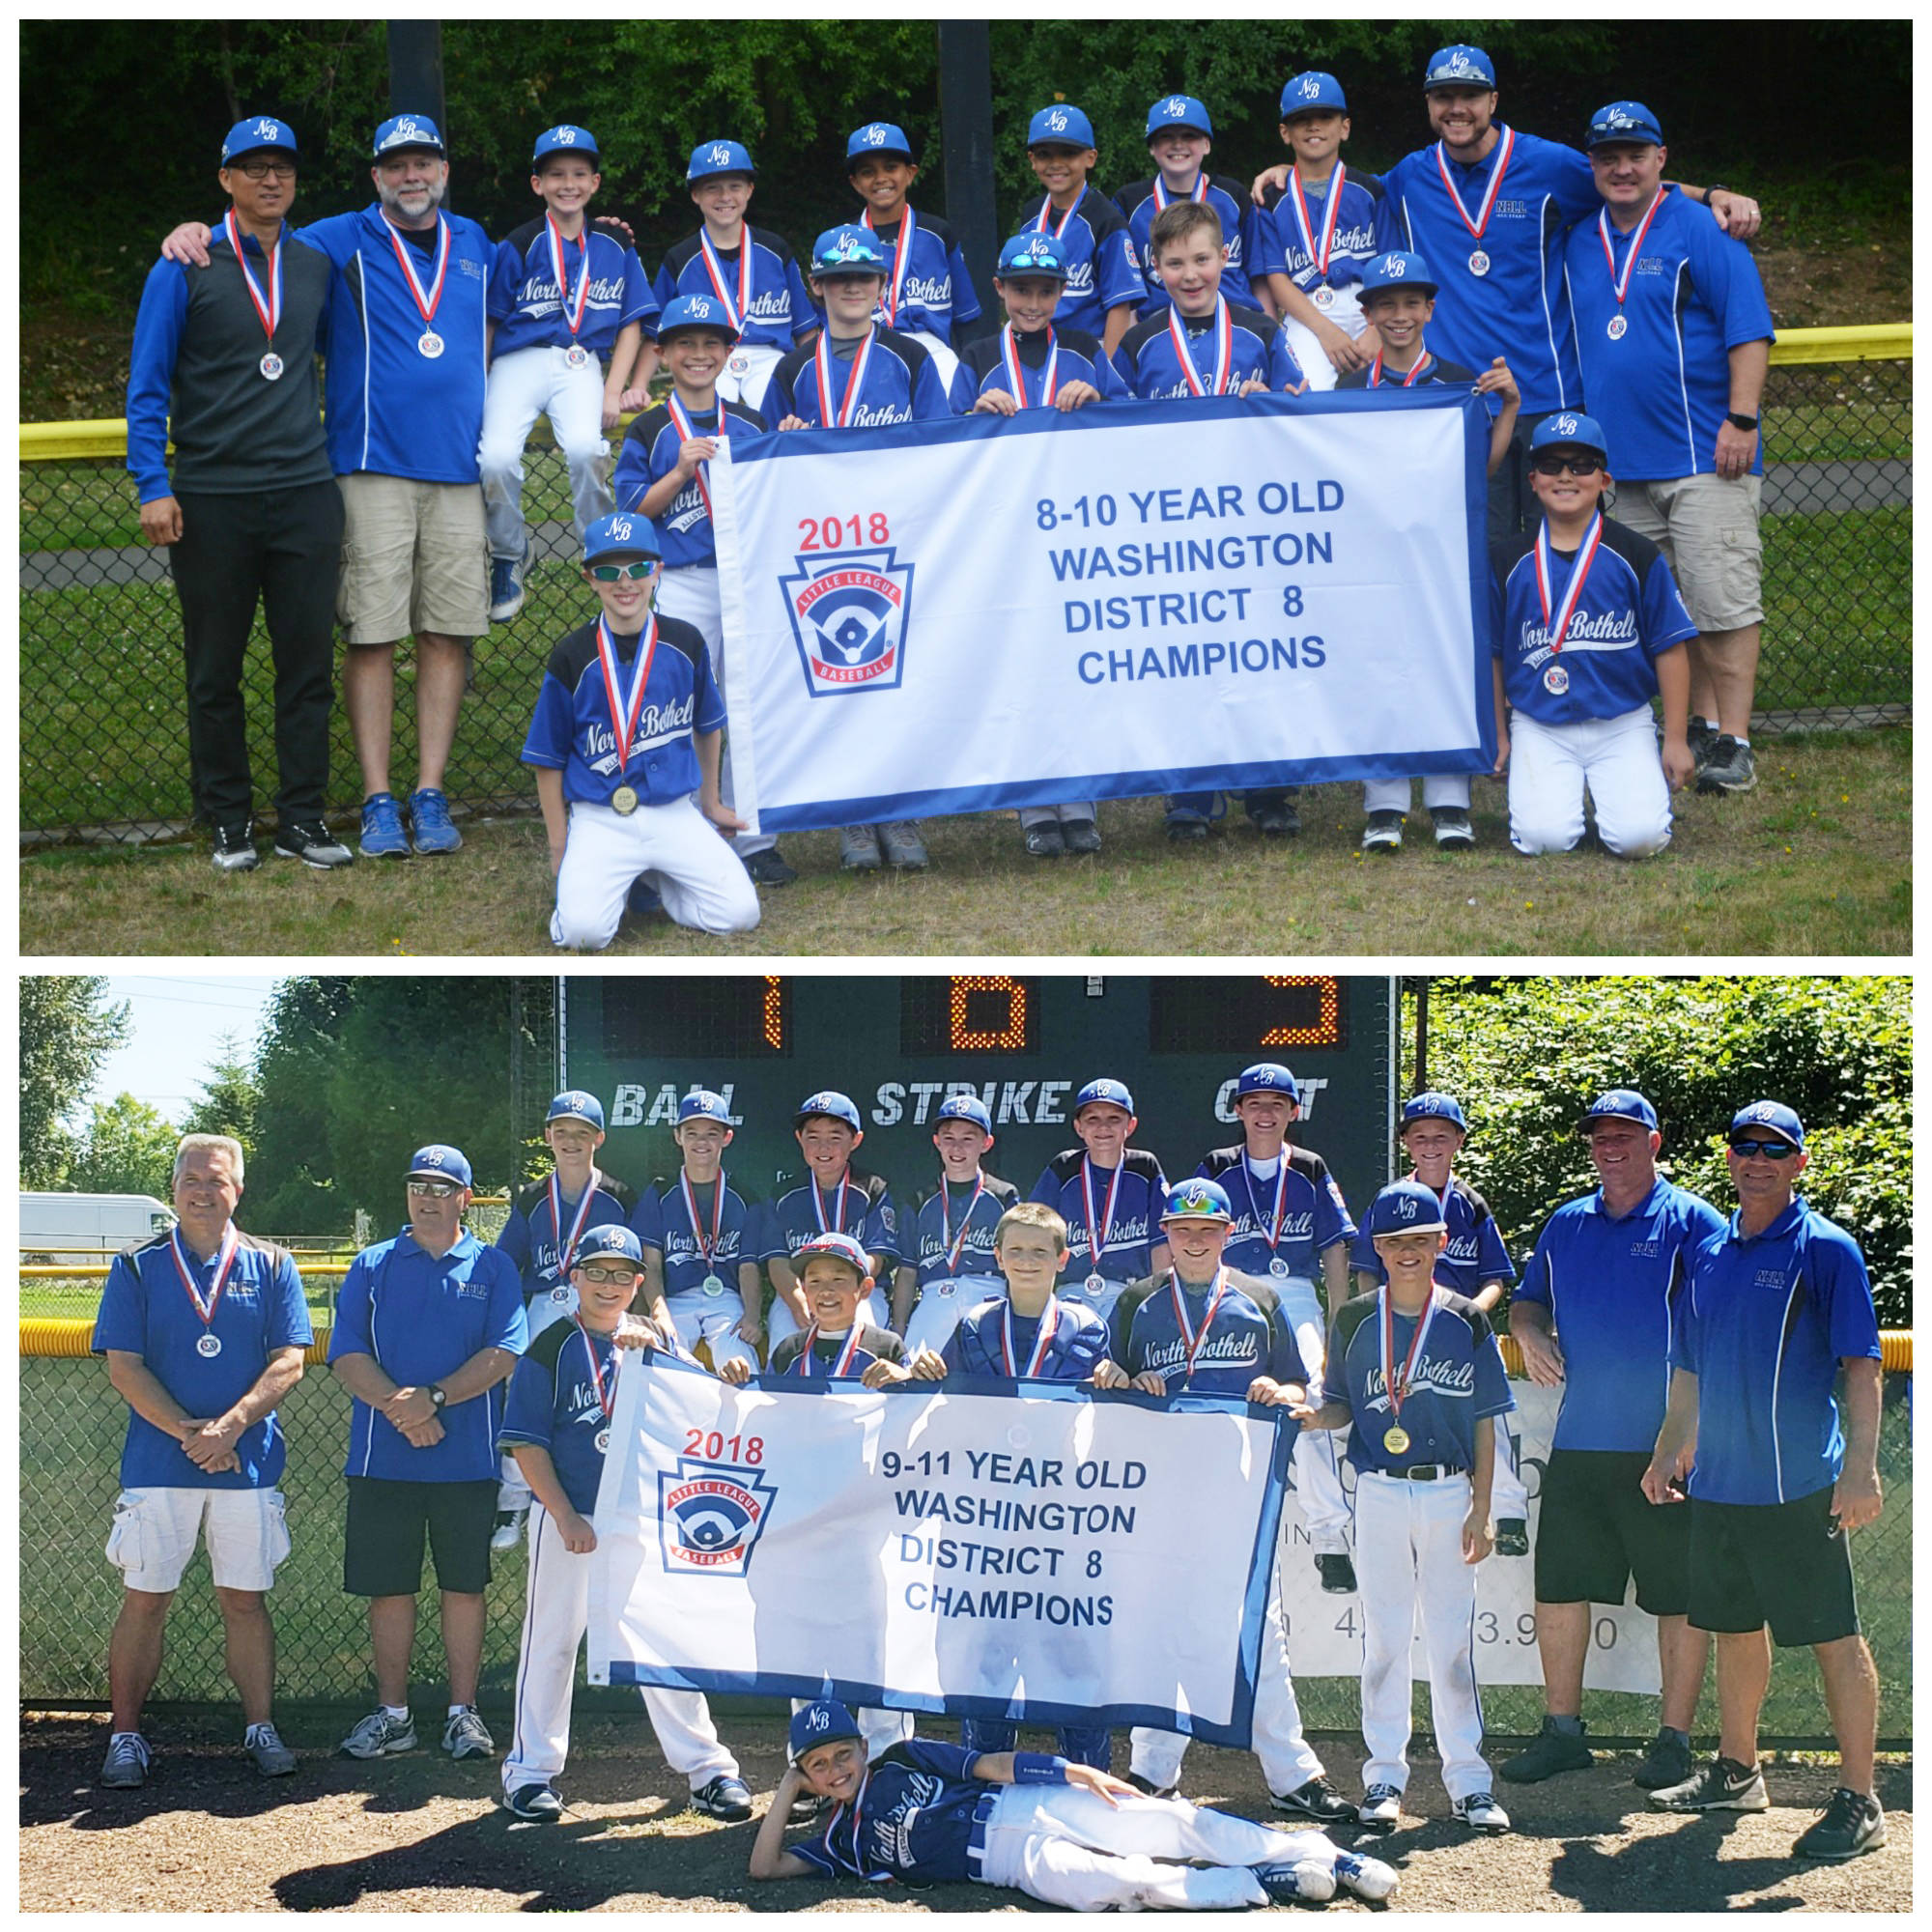 The 8/9/10 North Bothell Little League baseball all-star team (top) won its District 8 tournament on July 1 and played in the state tournament at Lyndale Park in Lynnwood. The 9/10/11 NBLL baseball all-star team won its District 8 baseball tournament on July 7 and competed in the state tournament in SeaTac. Both state tourneys took place after the Reporter’s deadline.                                The 8-10s are: Nathan Hunter, Ethan Inocencio, Caden Jackson, Aidan Kim, Chase Kline, Brody Madsen, Obie McCormick, Eric Muchinsky, Ben Ojeda, Daniel Ojeda, Nathan Ramcharan, Ethan Swallom and Cam Wallace. Coaches: Kyle Swallom, Jimmy Madsen, Adam Hunter and Ben Kim.                                The 9-11s are: Cayden Christopherson, Jack Cochran, Zach Daniel, Aksel Keim, Nolan LeDoux, Cole McCourt, Brady Miller, Kody Moyer, Jayden Salman, Blake Skinner, Ethan Wiley, Dominic Wilson and Jacob Zbiegien. Coaches: Danny Keim, Mark Ryder and Craig Lohr.                                Courtesy photos